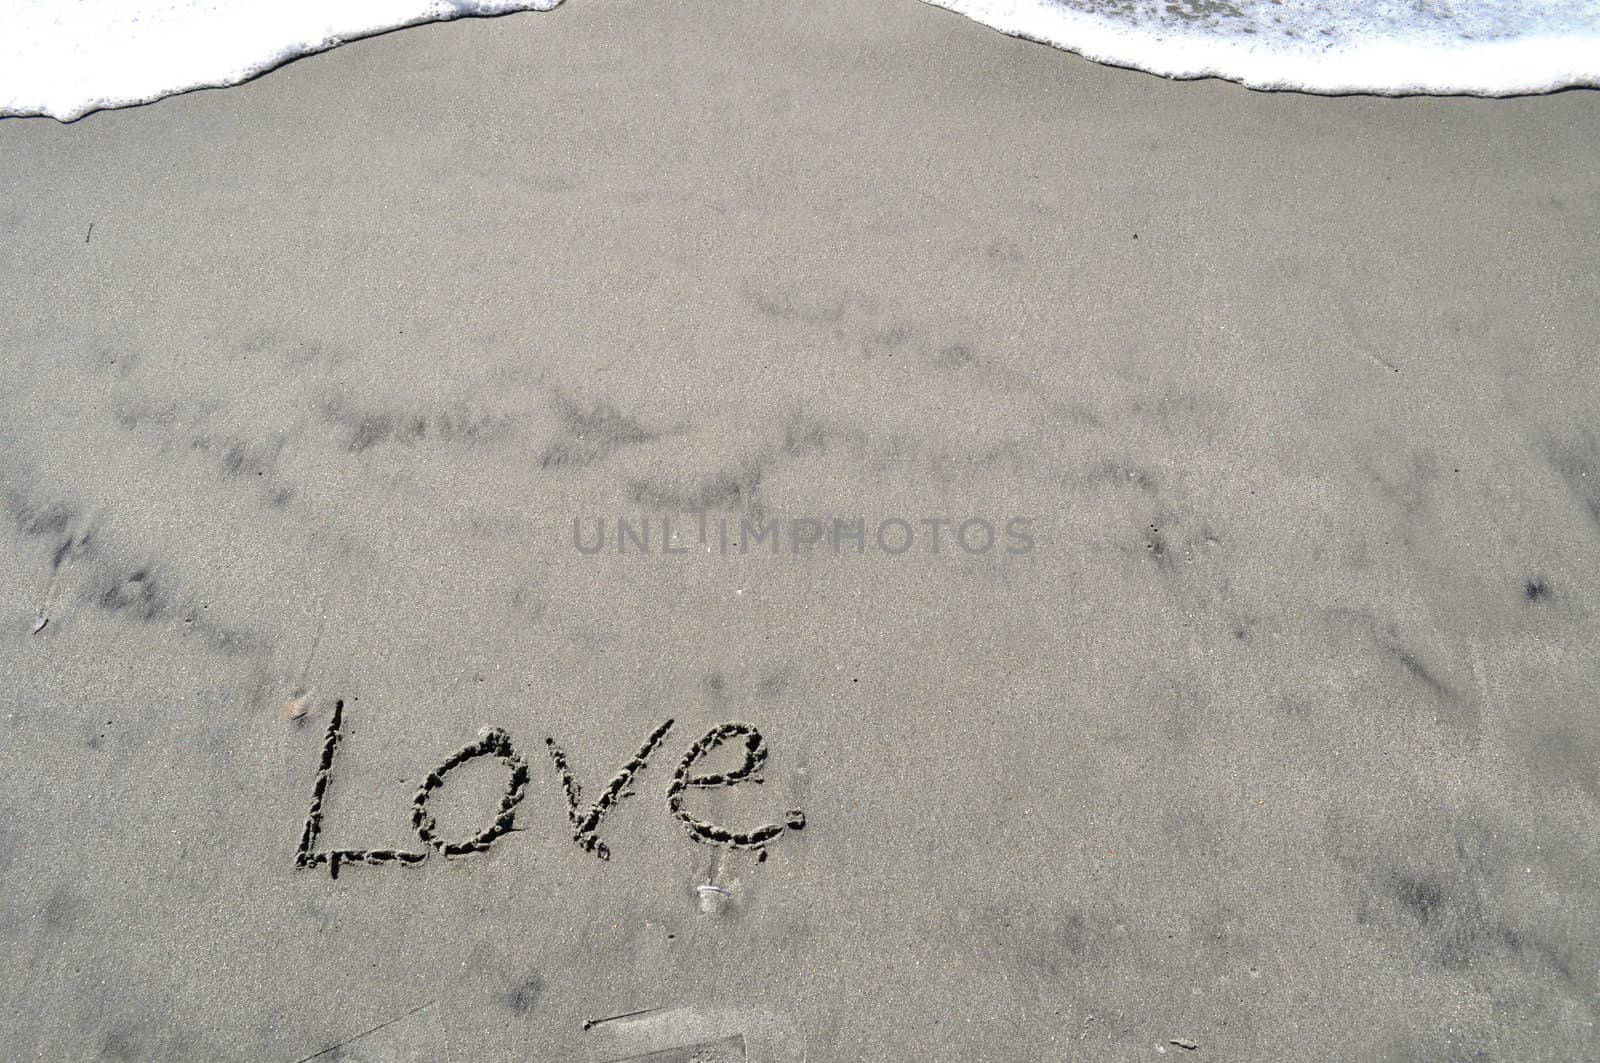 Love In the Sand by RefocusPhoto